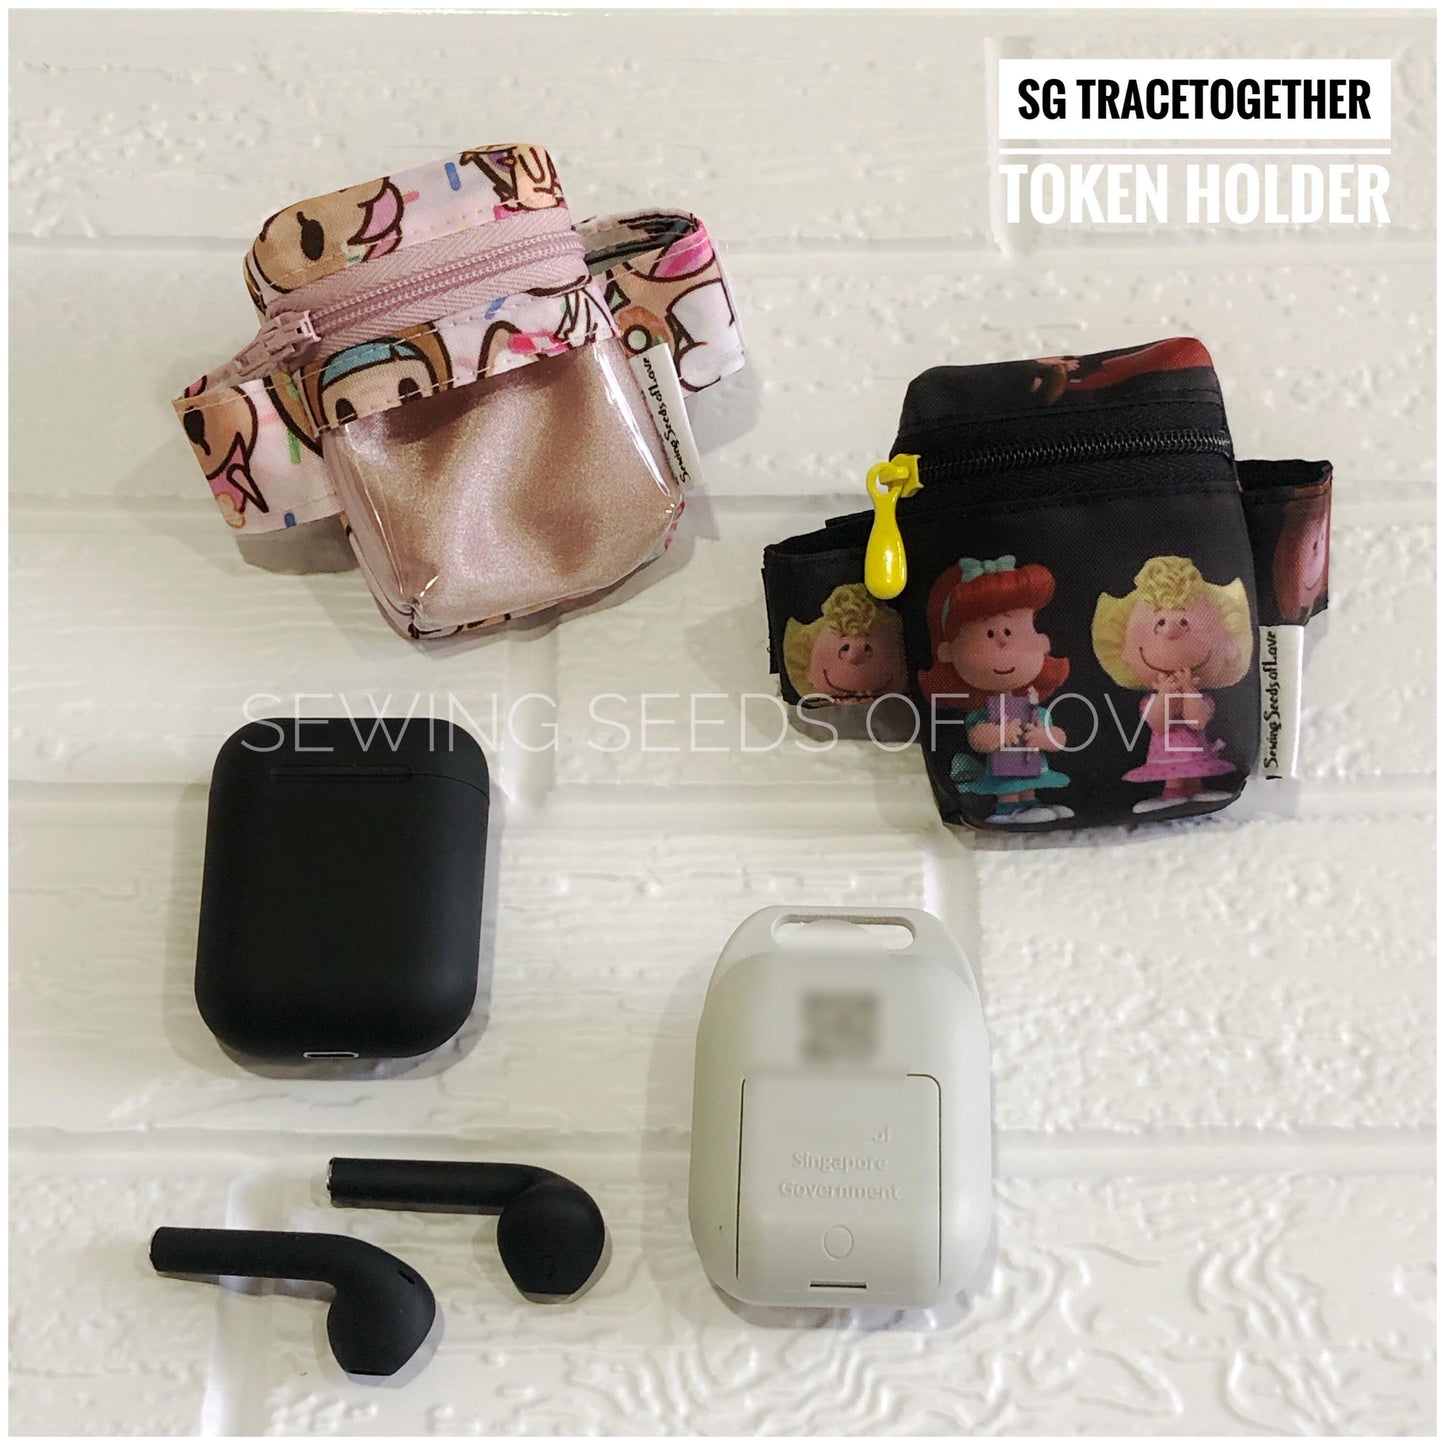 SSOL Airpod Case / SG TraceTogether Token Holder Pattern (only video tutorial)